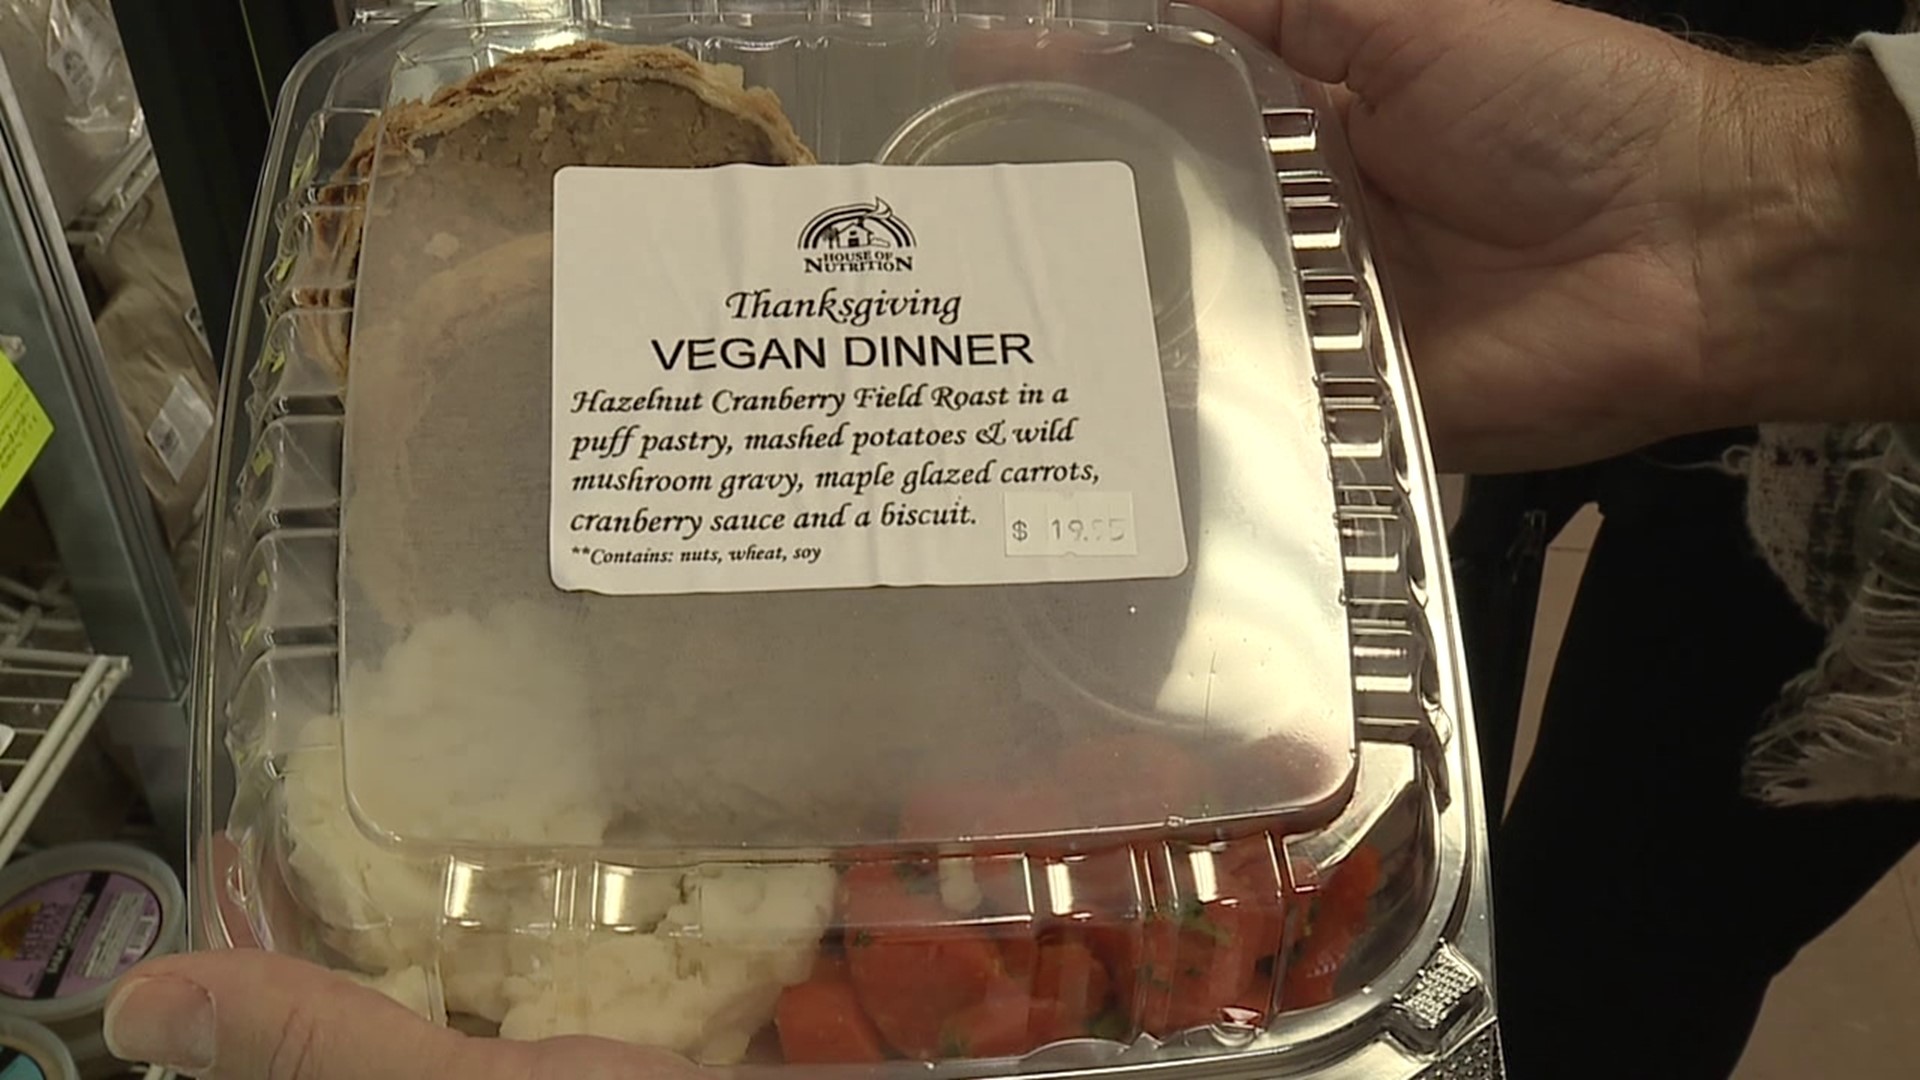 Local vegan shops tell Newswatch 16 they're seeing an increase in plant-based food this holiday season.